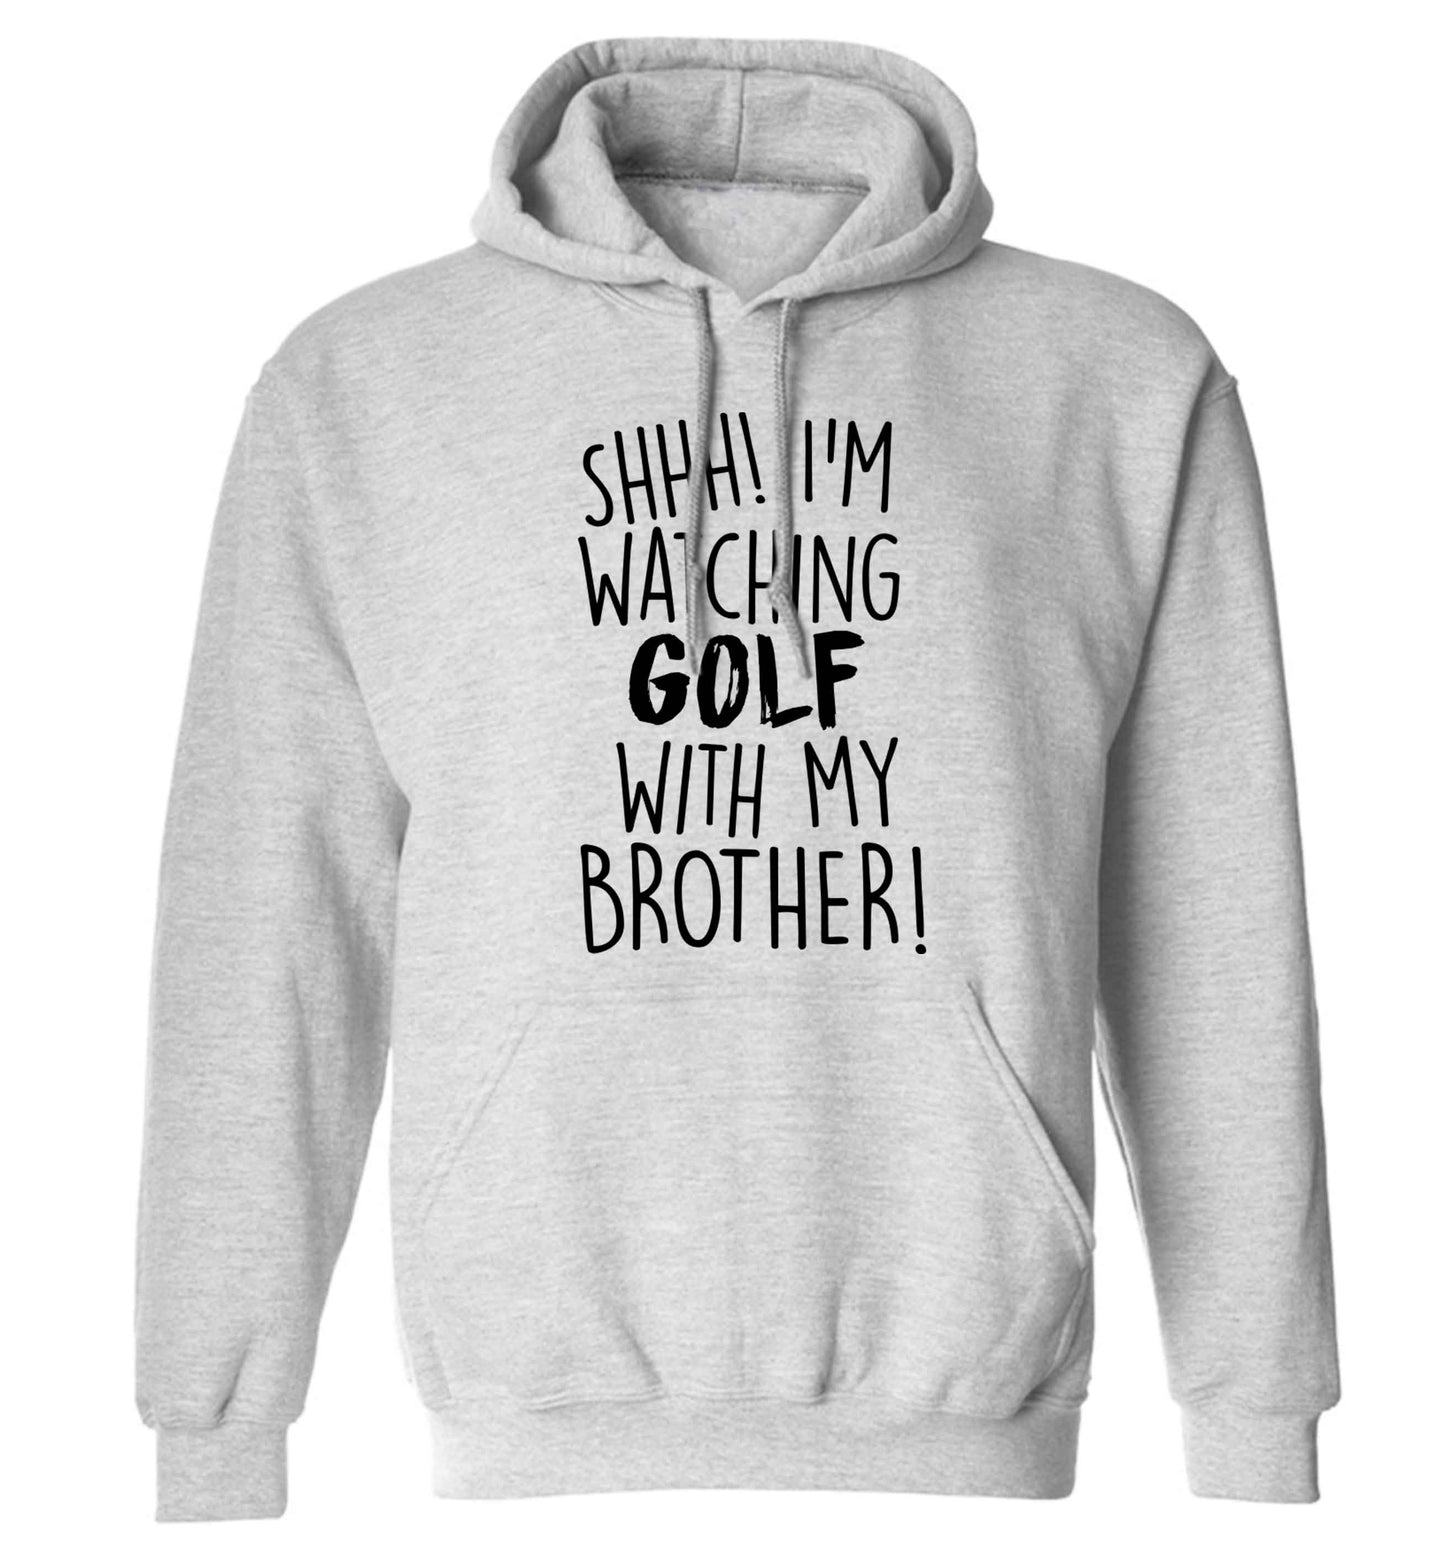 Shh I'm watching golf with my brother adults unisex grey hoodie 2XL